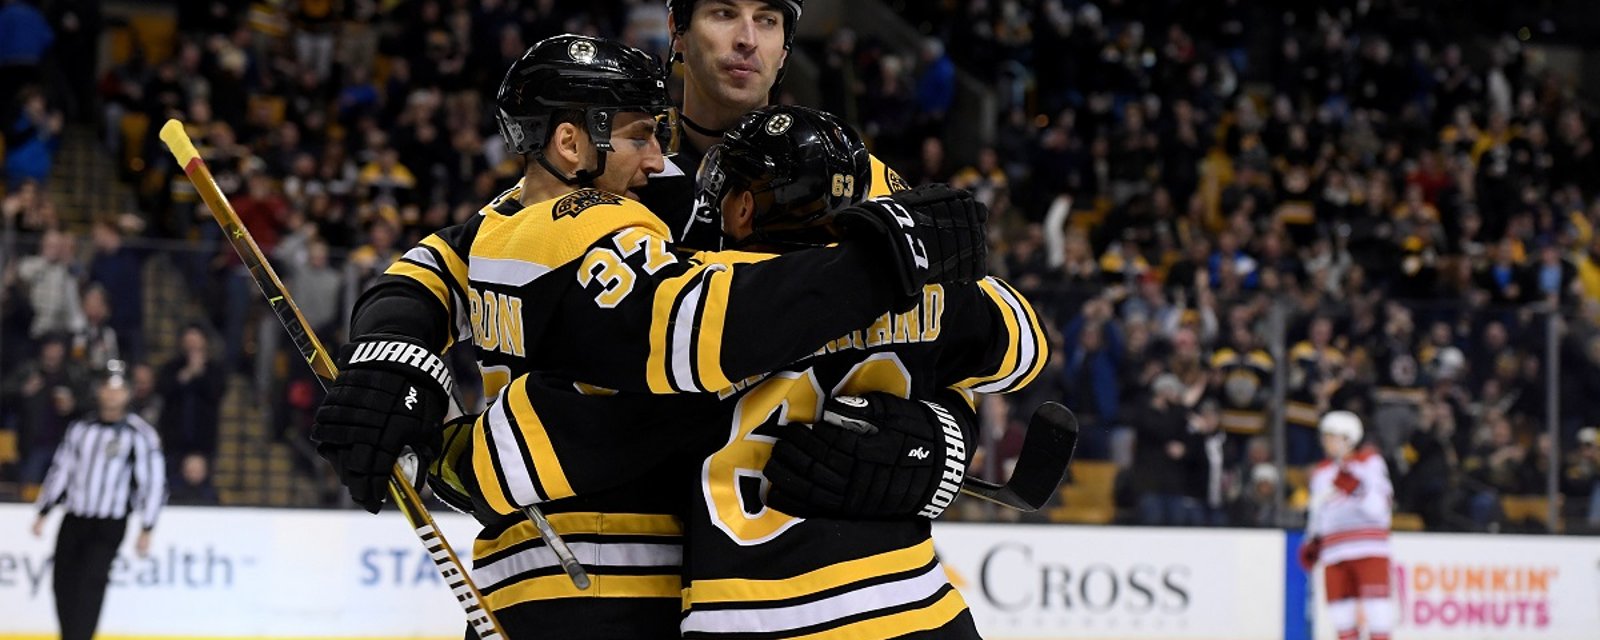 Bruins lose two of their top players to long-term injuries.